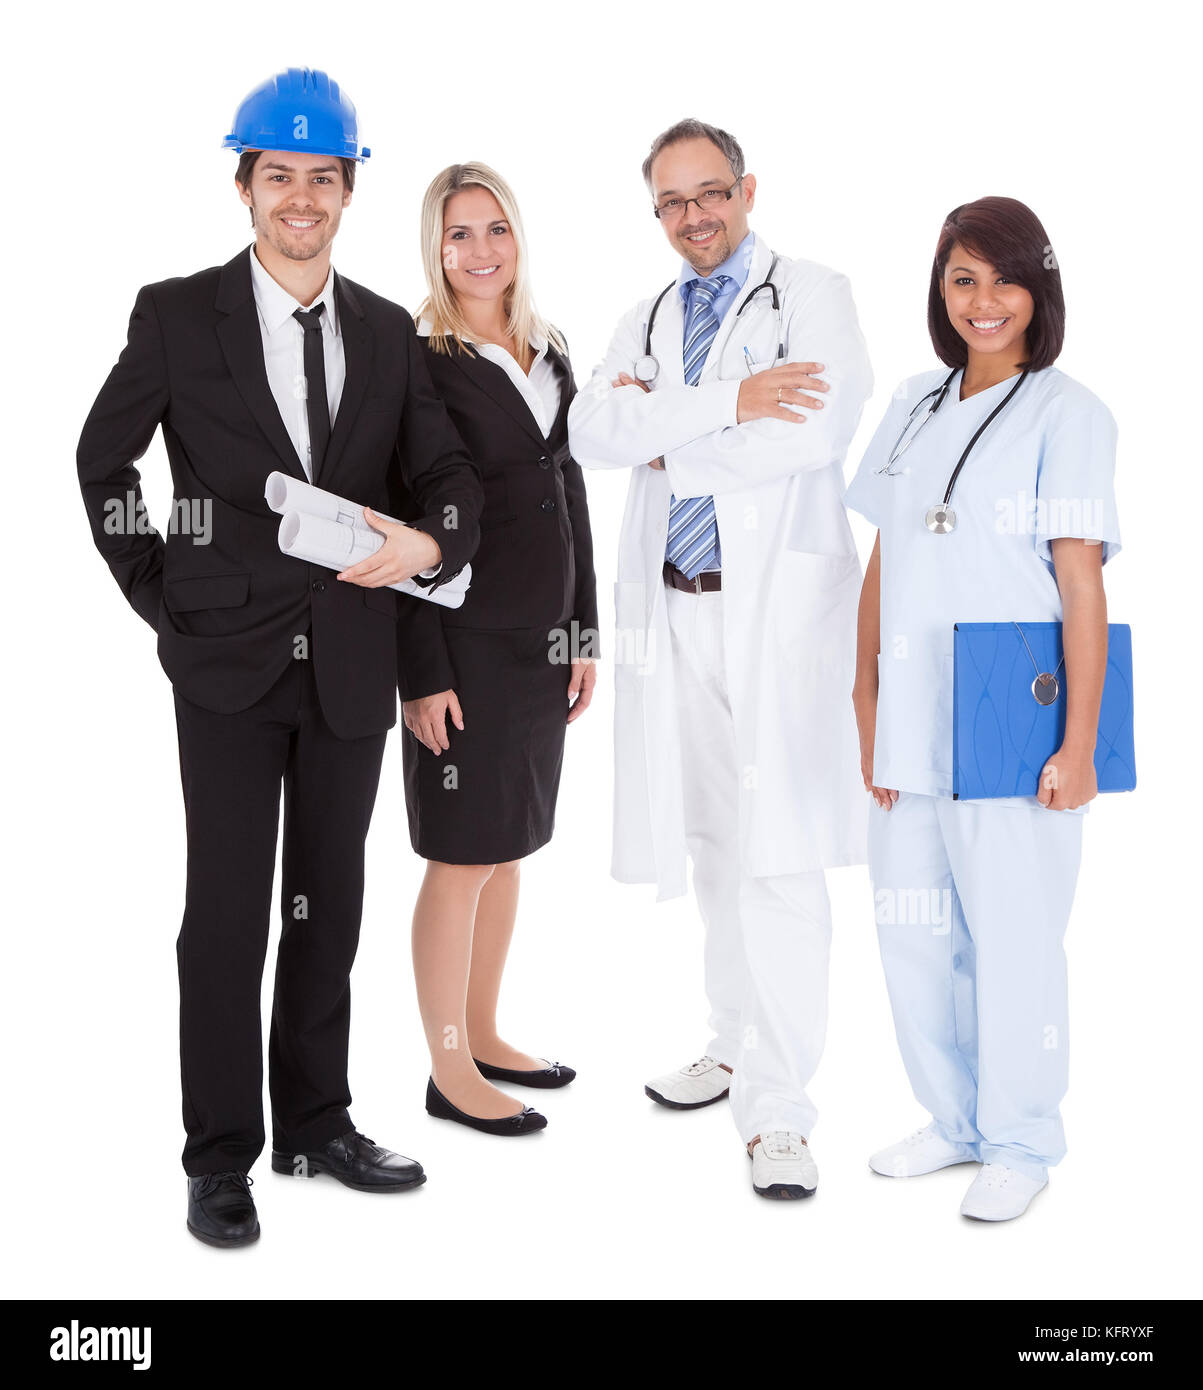 Portrait of happy people of different professions together on white background Stock Photo